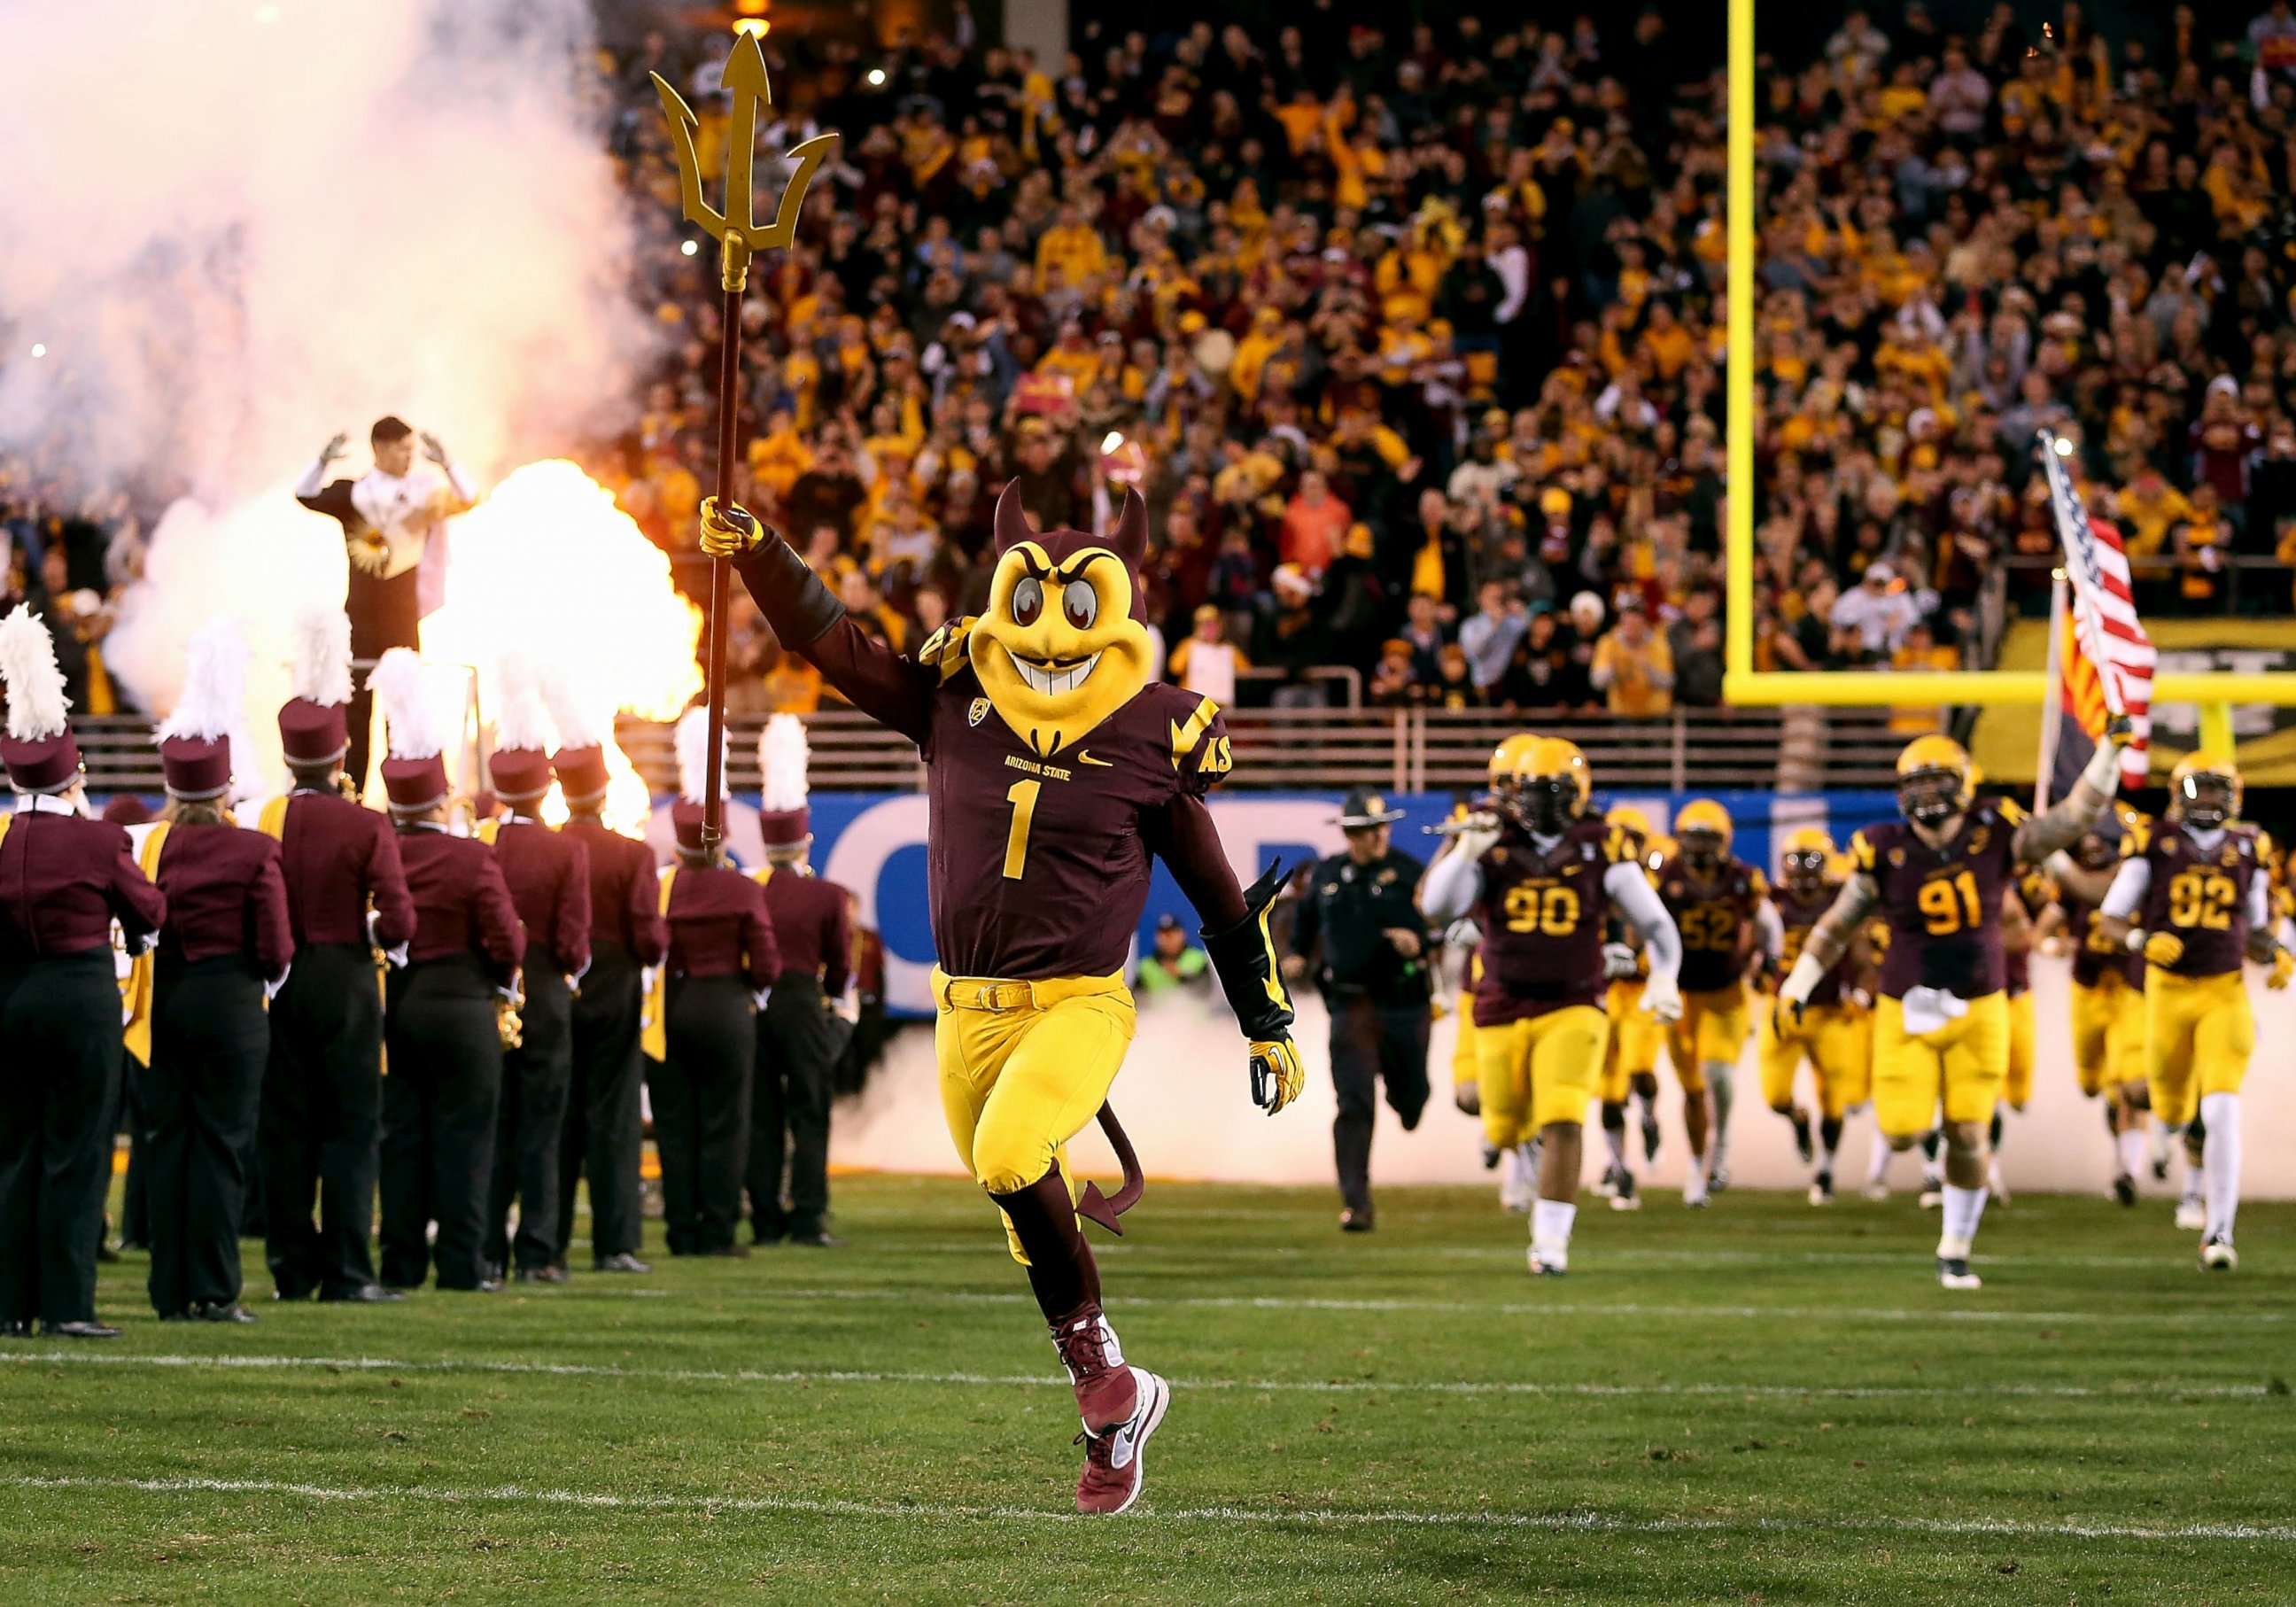 PHOTO: Arizona State Sun Devils mascot, Sparky runs out onto the field during the Pac 12 Championship game against the Arizona State Sun Devils at Sun Devil Stadium, Dec. 7, 2013, in Tempe, Arizona.